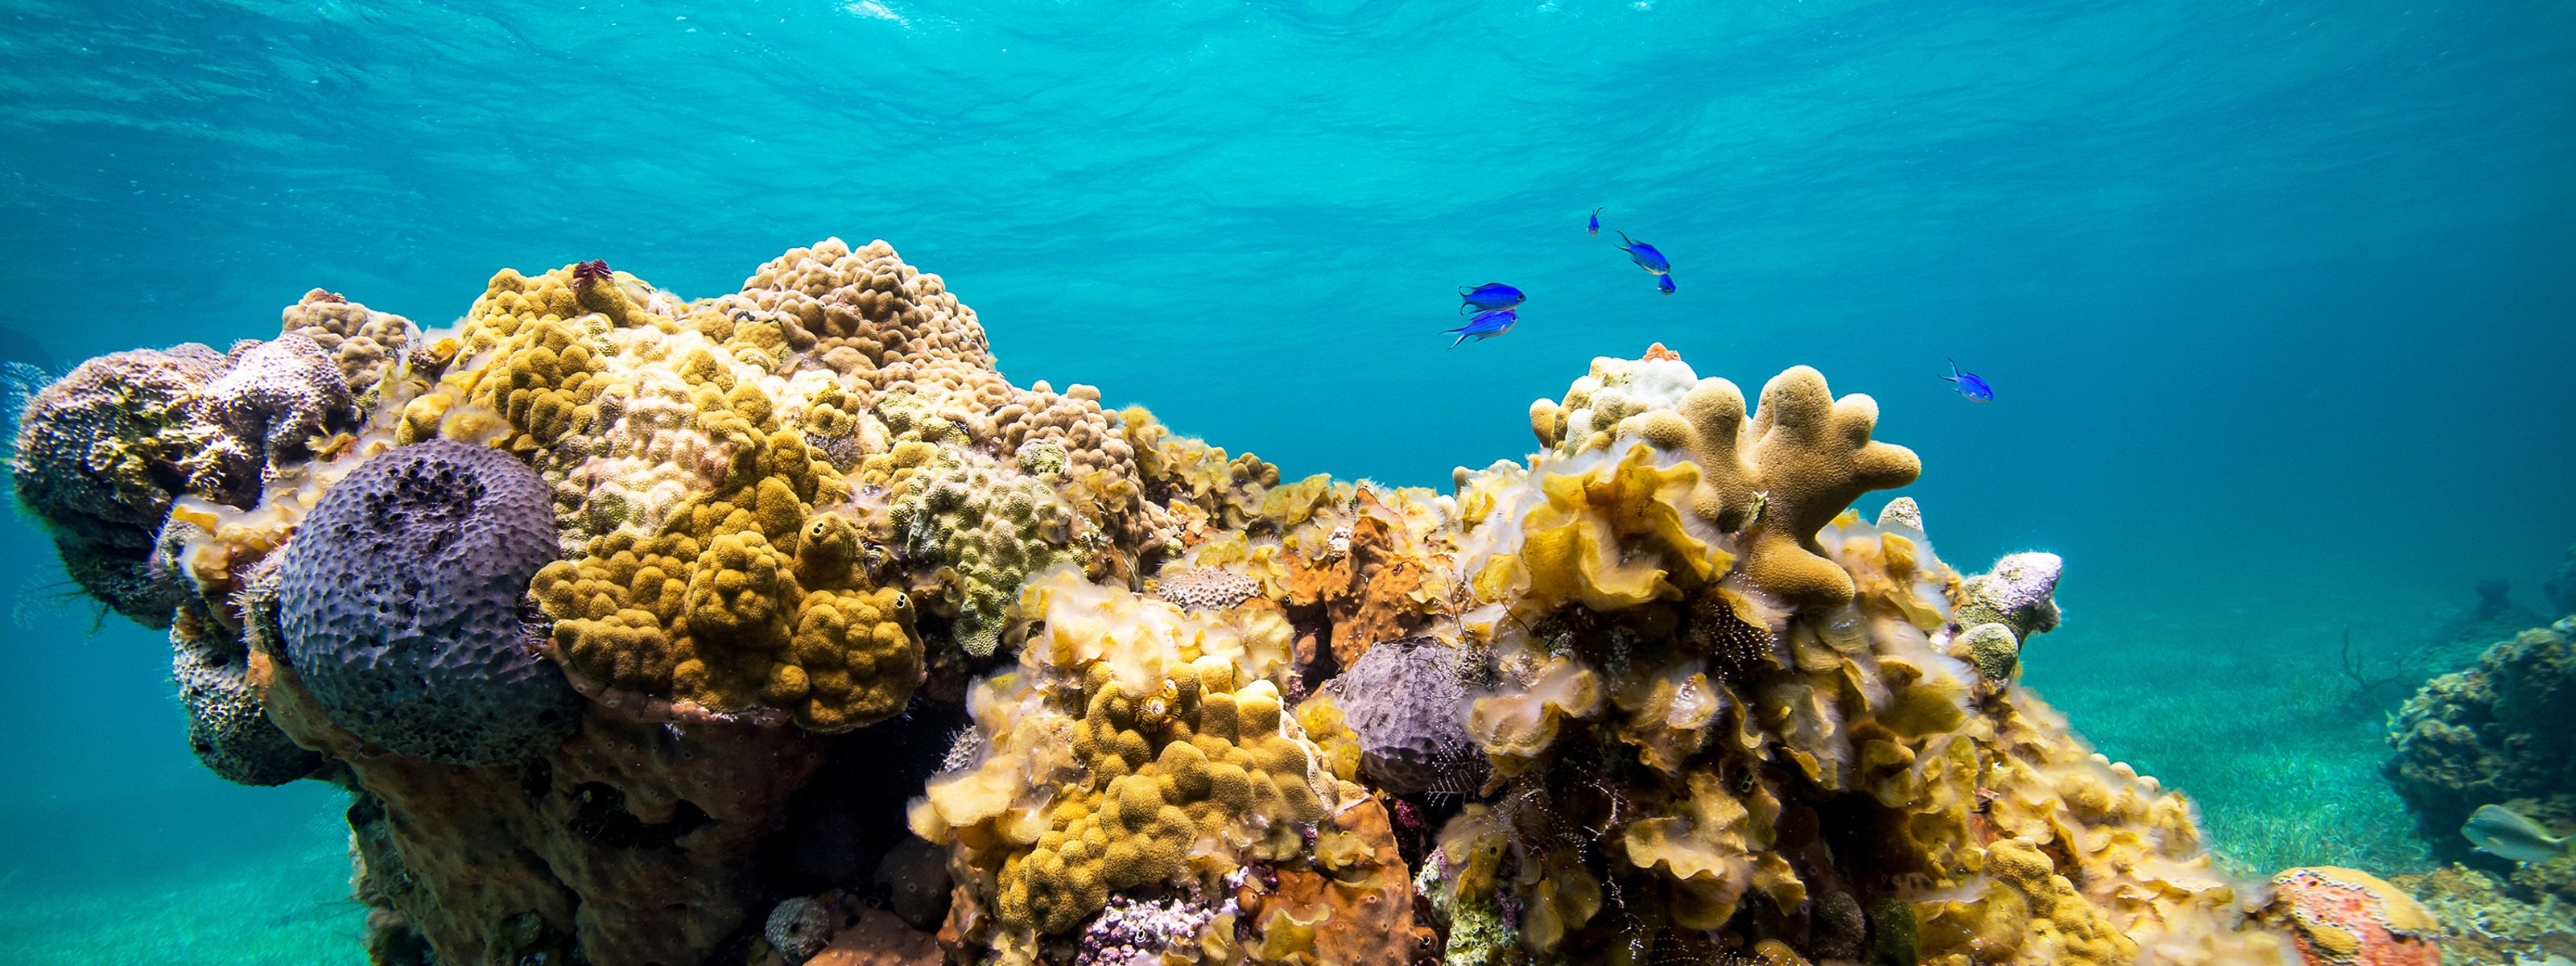 Underwater view of healthy coral reefs in the turquoise waters of the Caribbean.